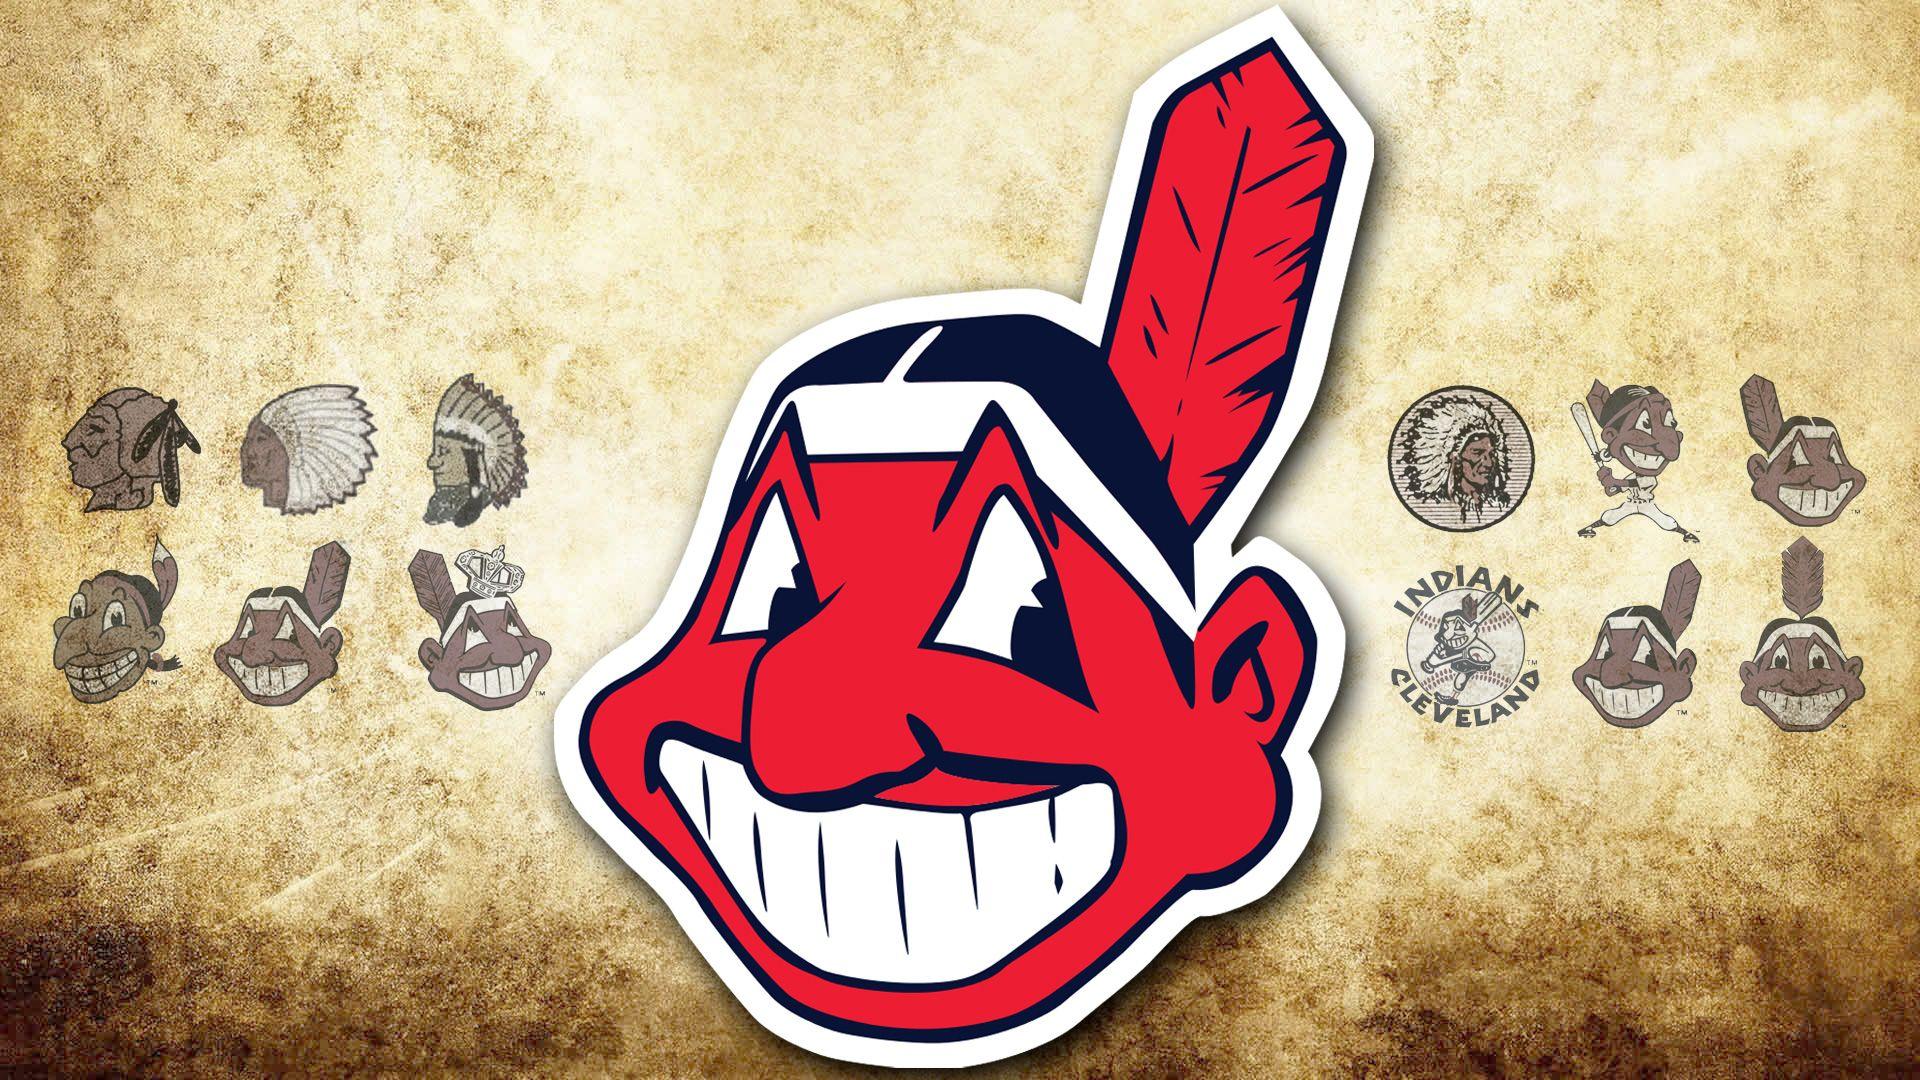 MLB Indians Logo - Indians should quit hedging, retire Chief Wahoo completely. MLB